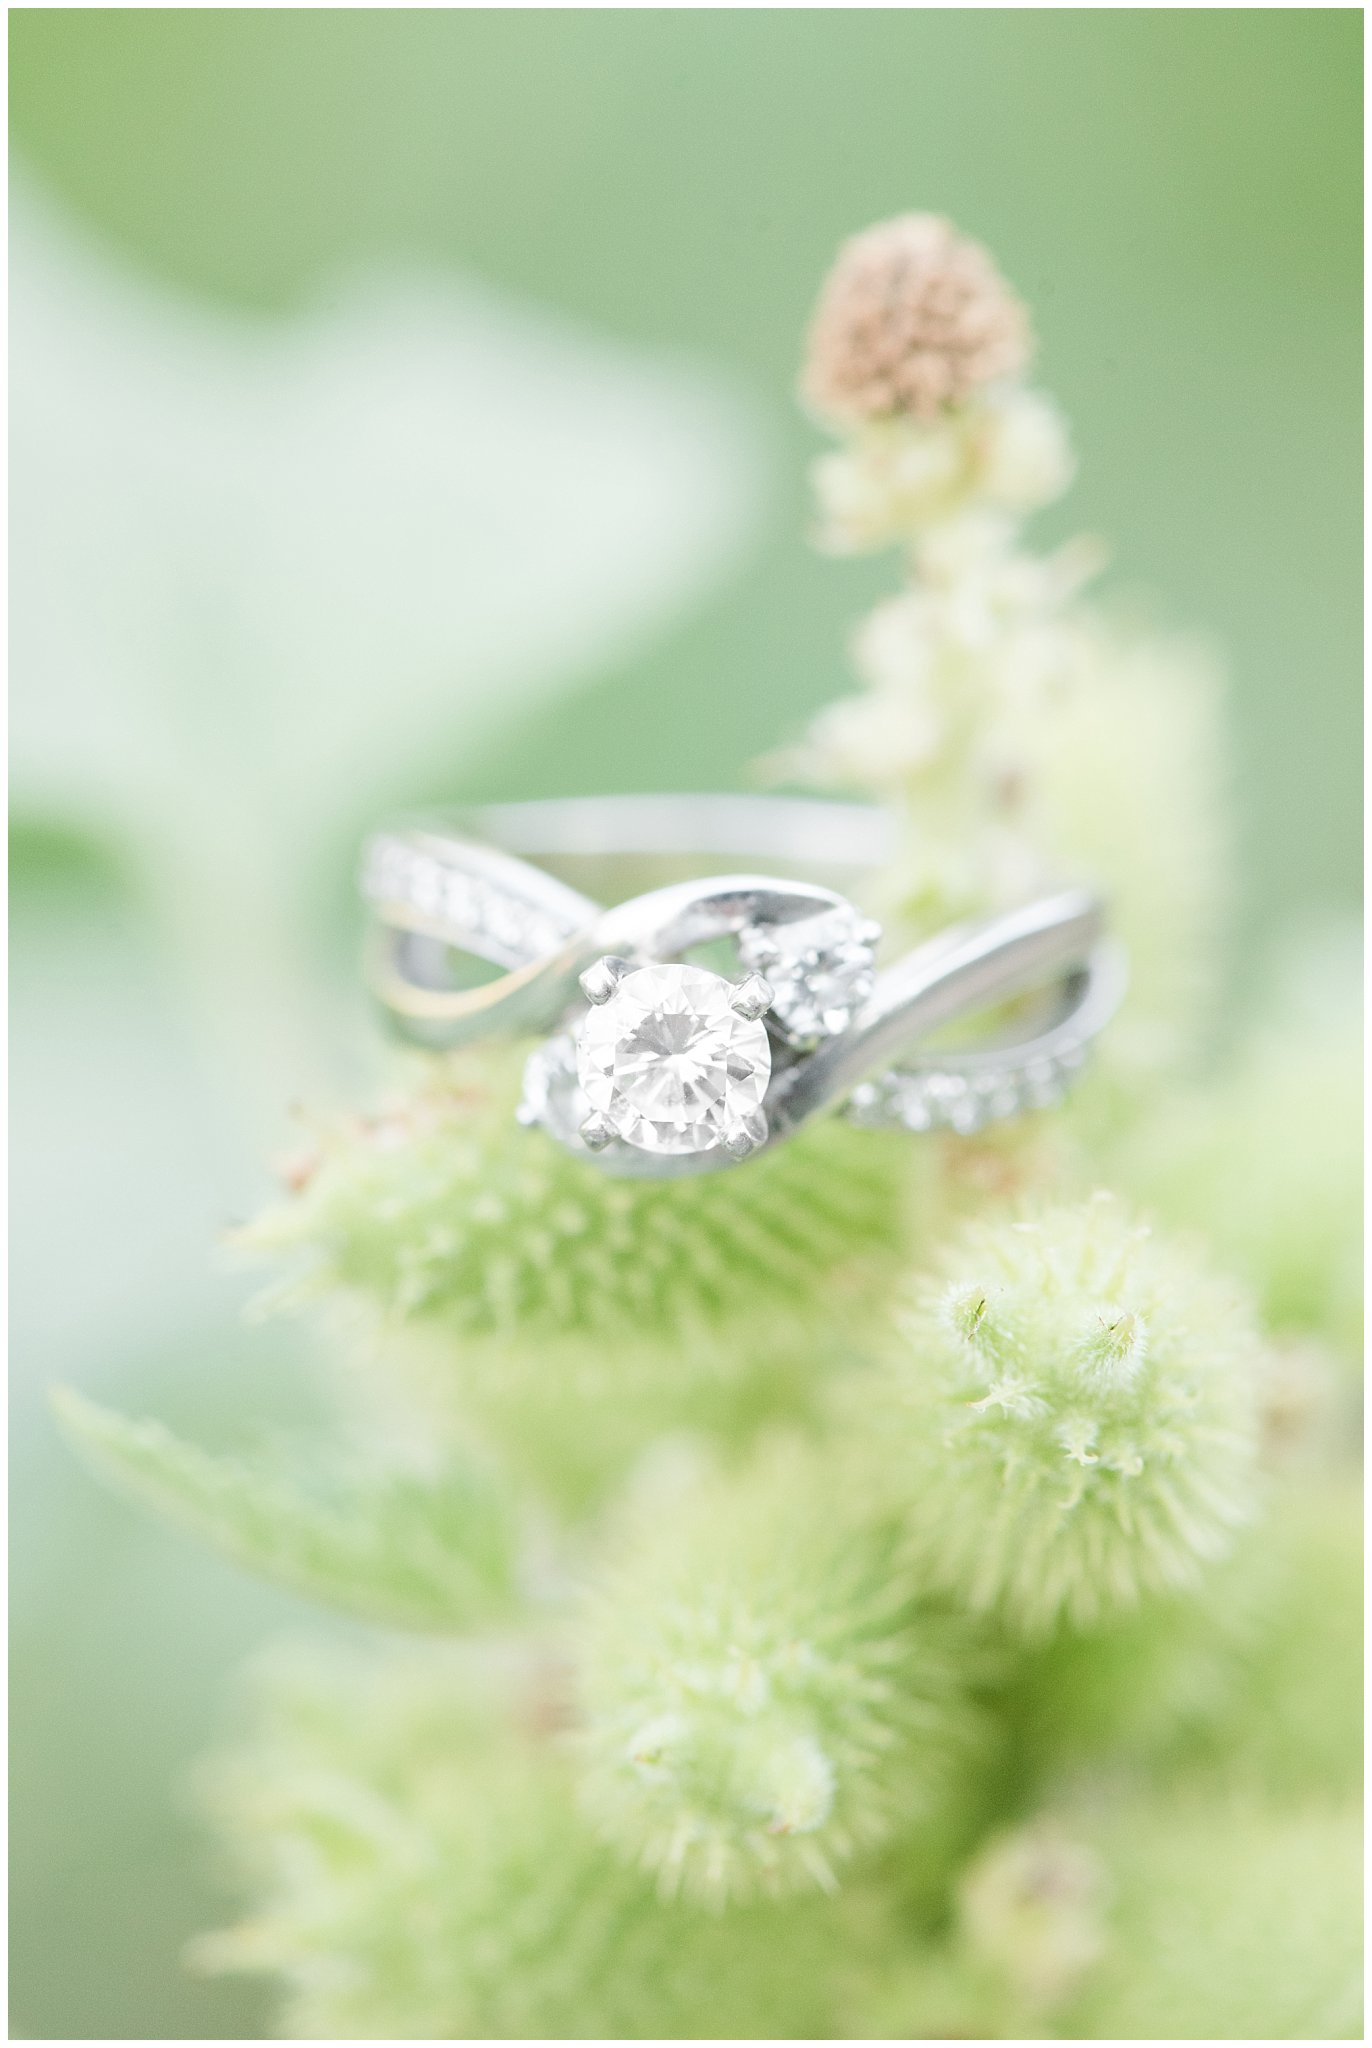 Emgagement ring on prickly plant | Fort Buenaventura Summer Engagement Session | Jessie and Dallin Photography